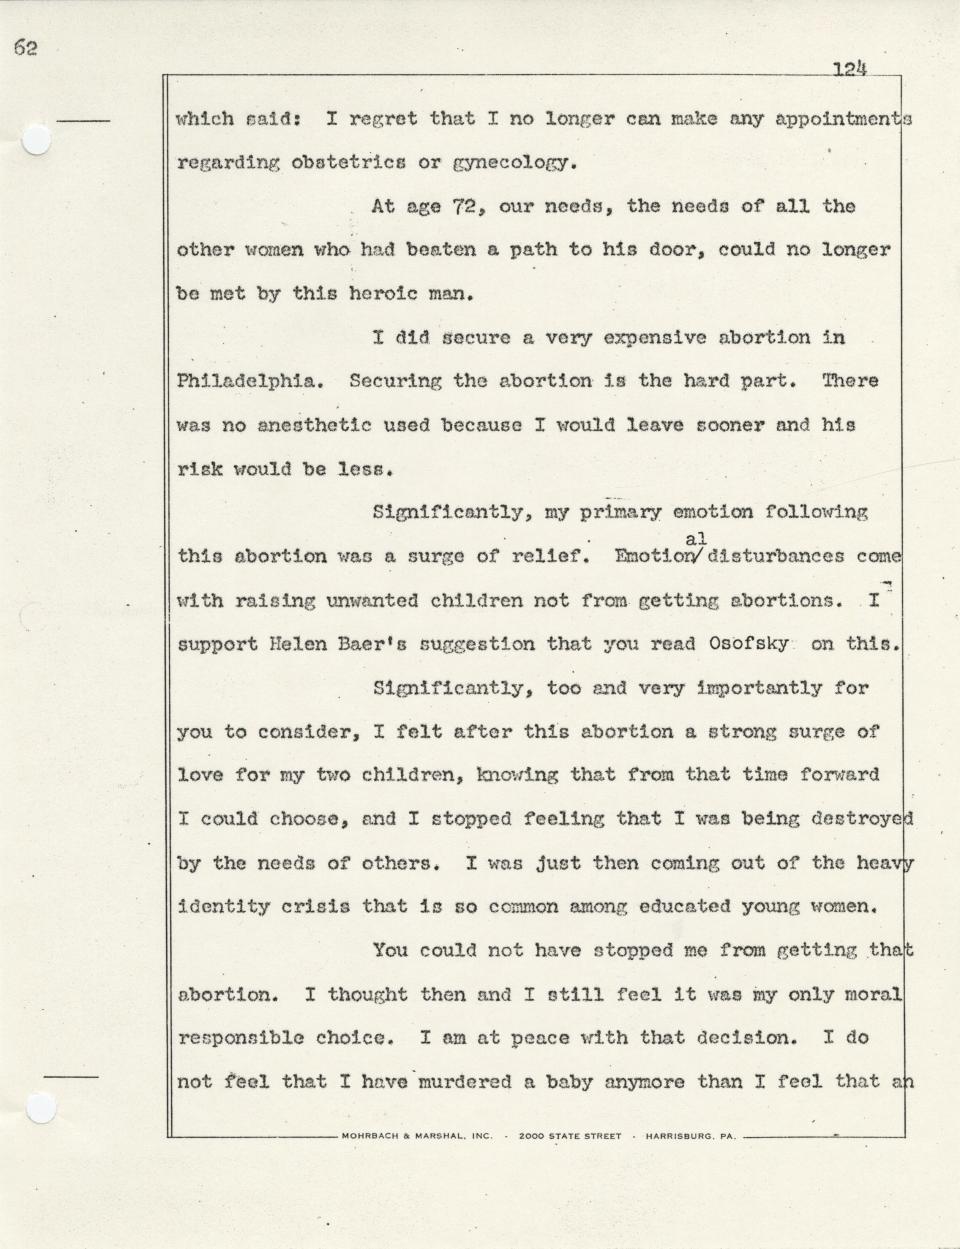 Transcript of Sylvia Stengle's testimony delivered to the Pennsylvania Abortion Law Commission in Harrisburg, Feb. 9. 1972.